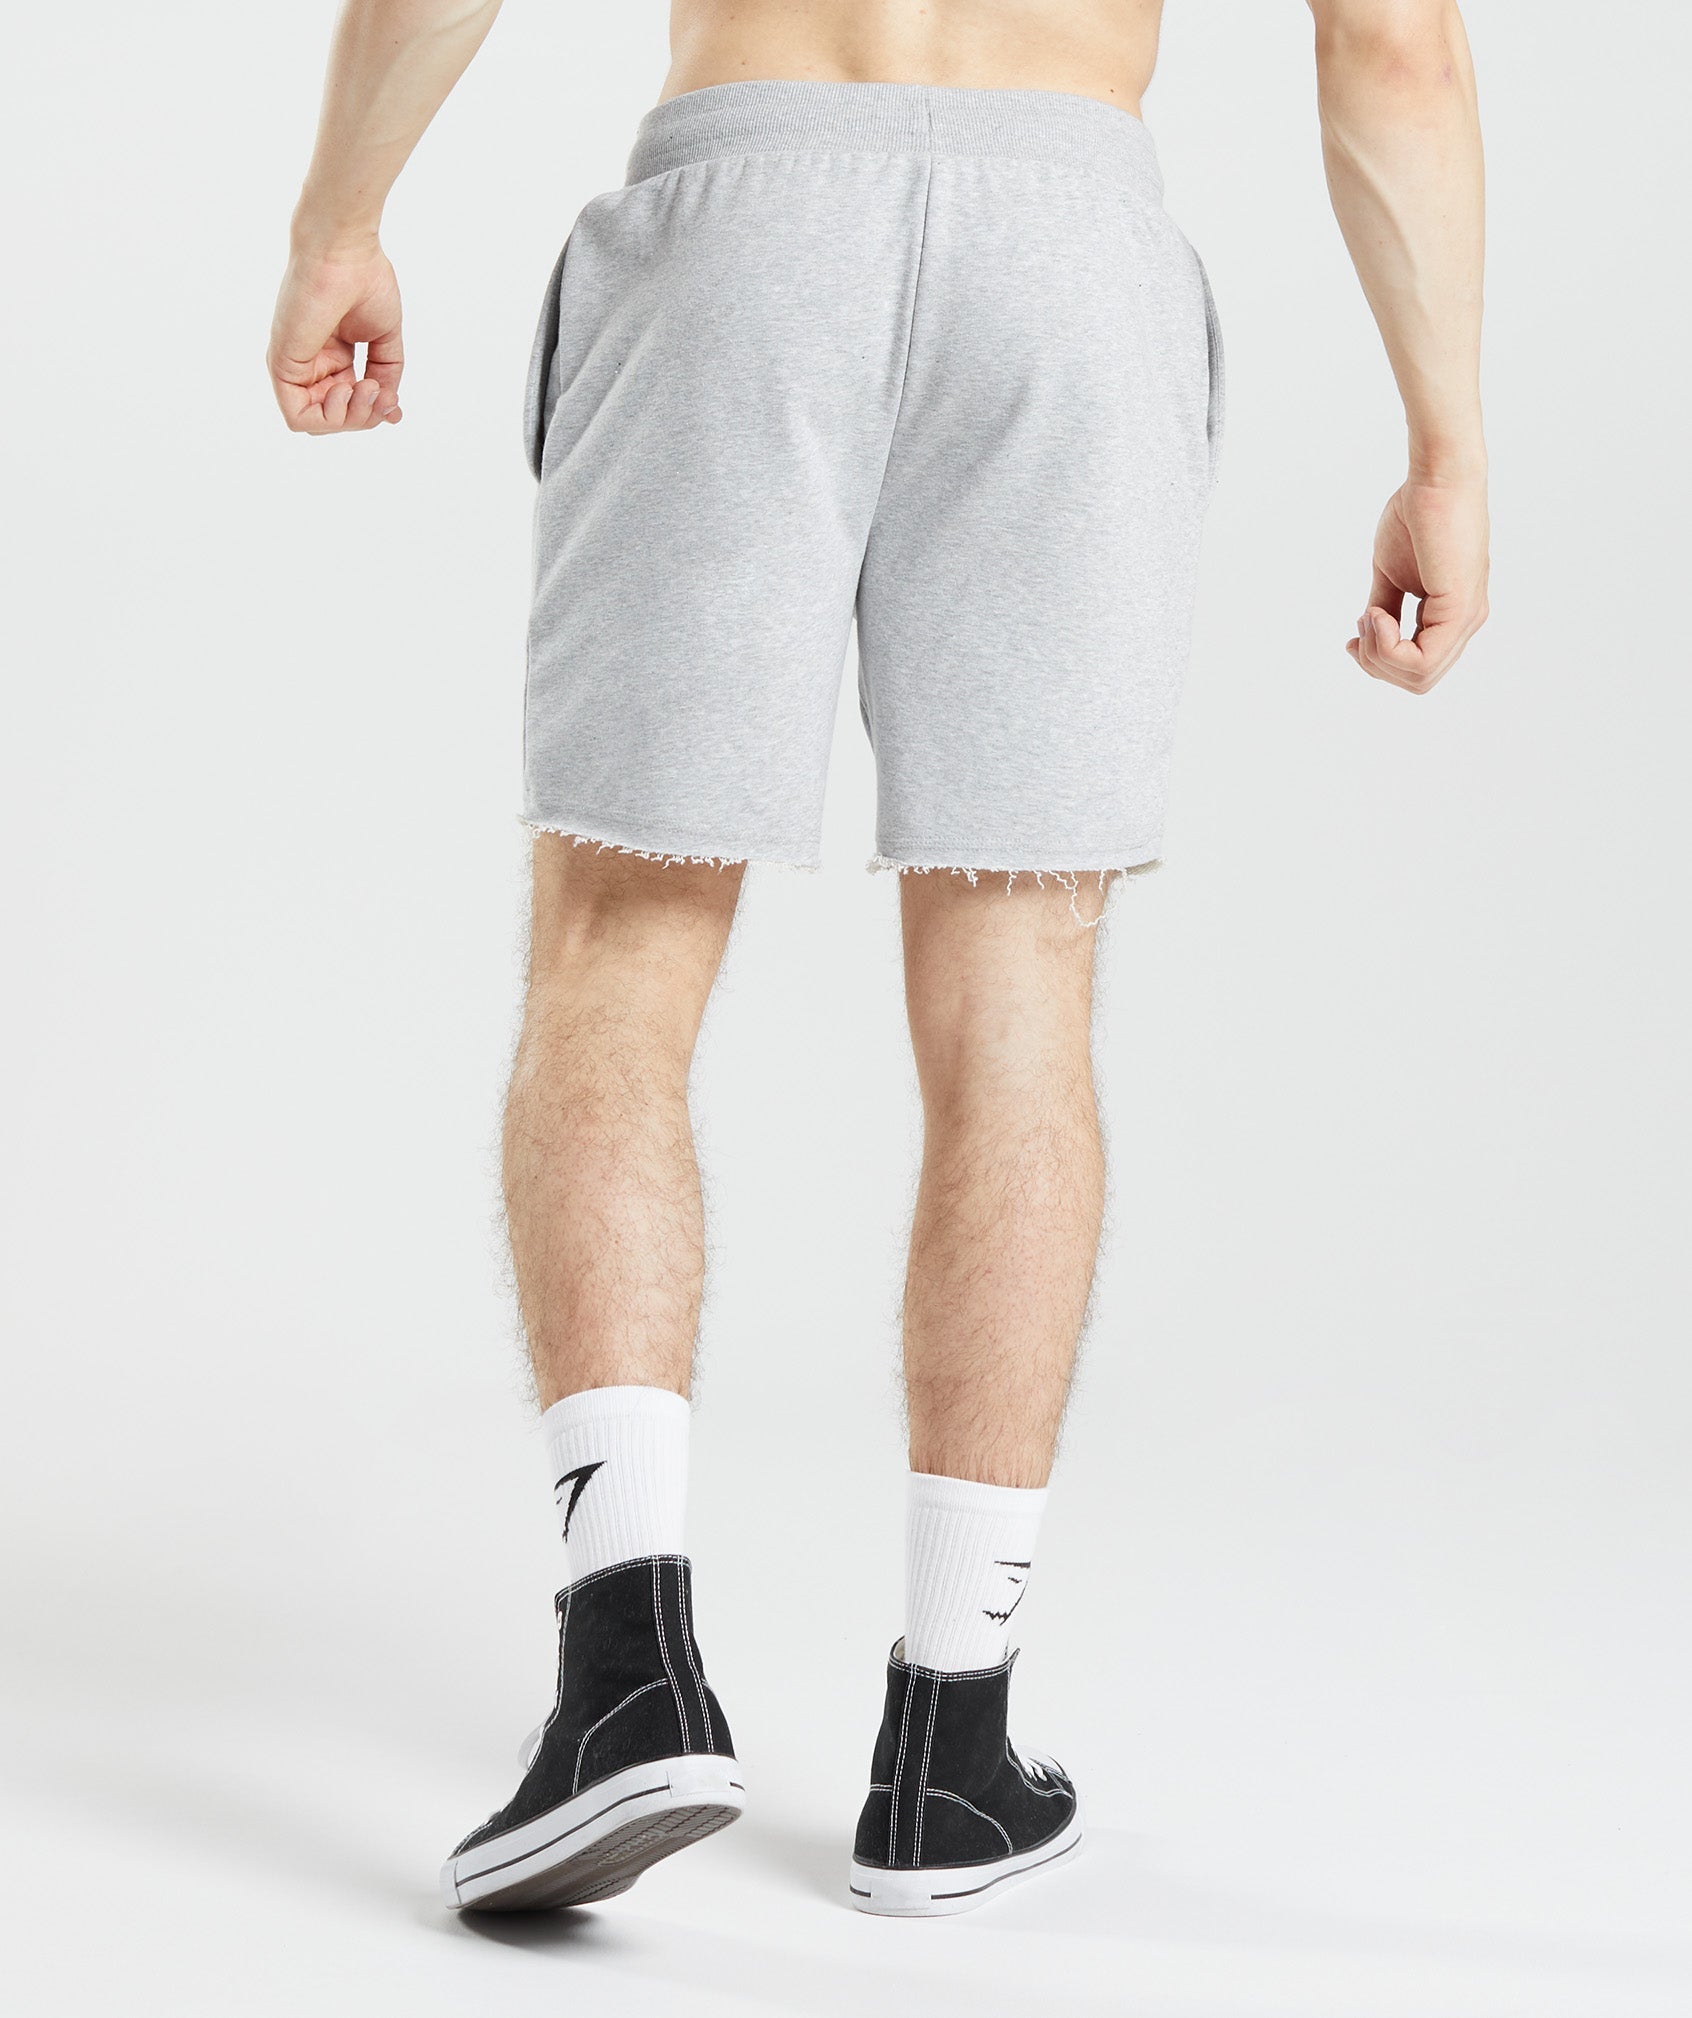 Legacy Shorts in Light Grey Core Marl - view 2